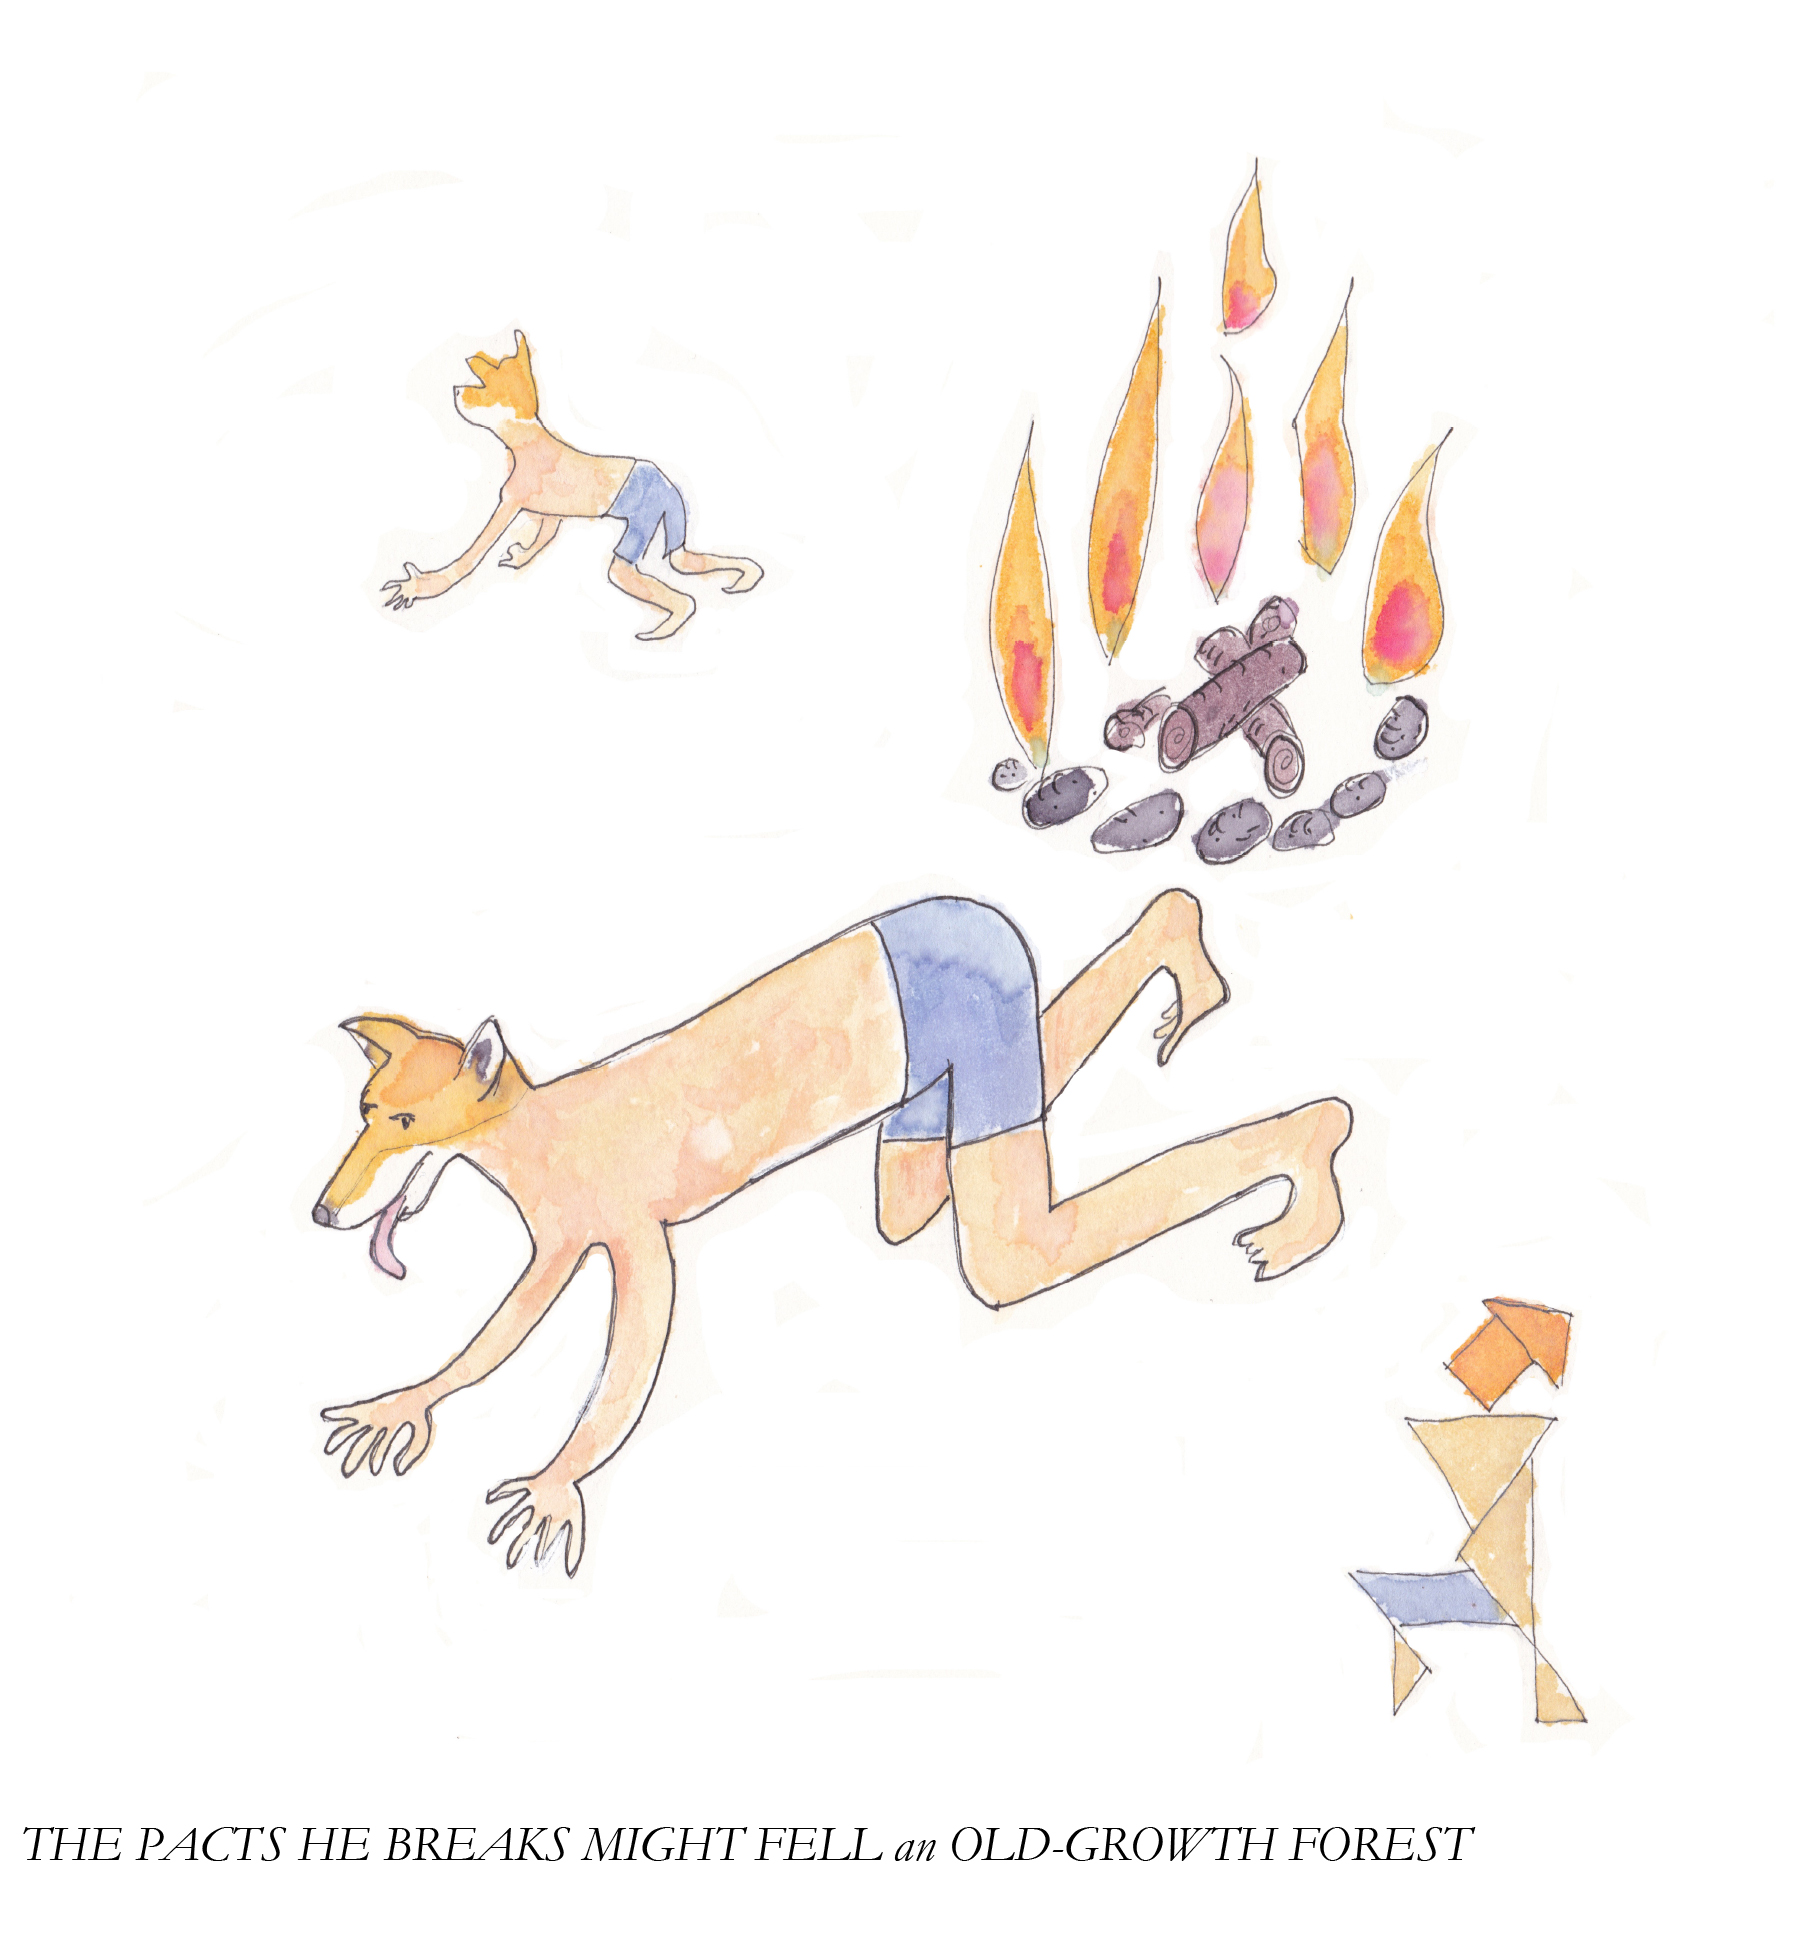 Men with dog heads running away from a campfire